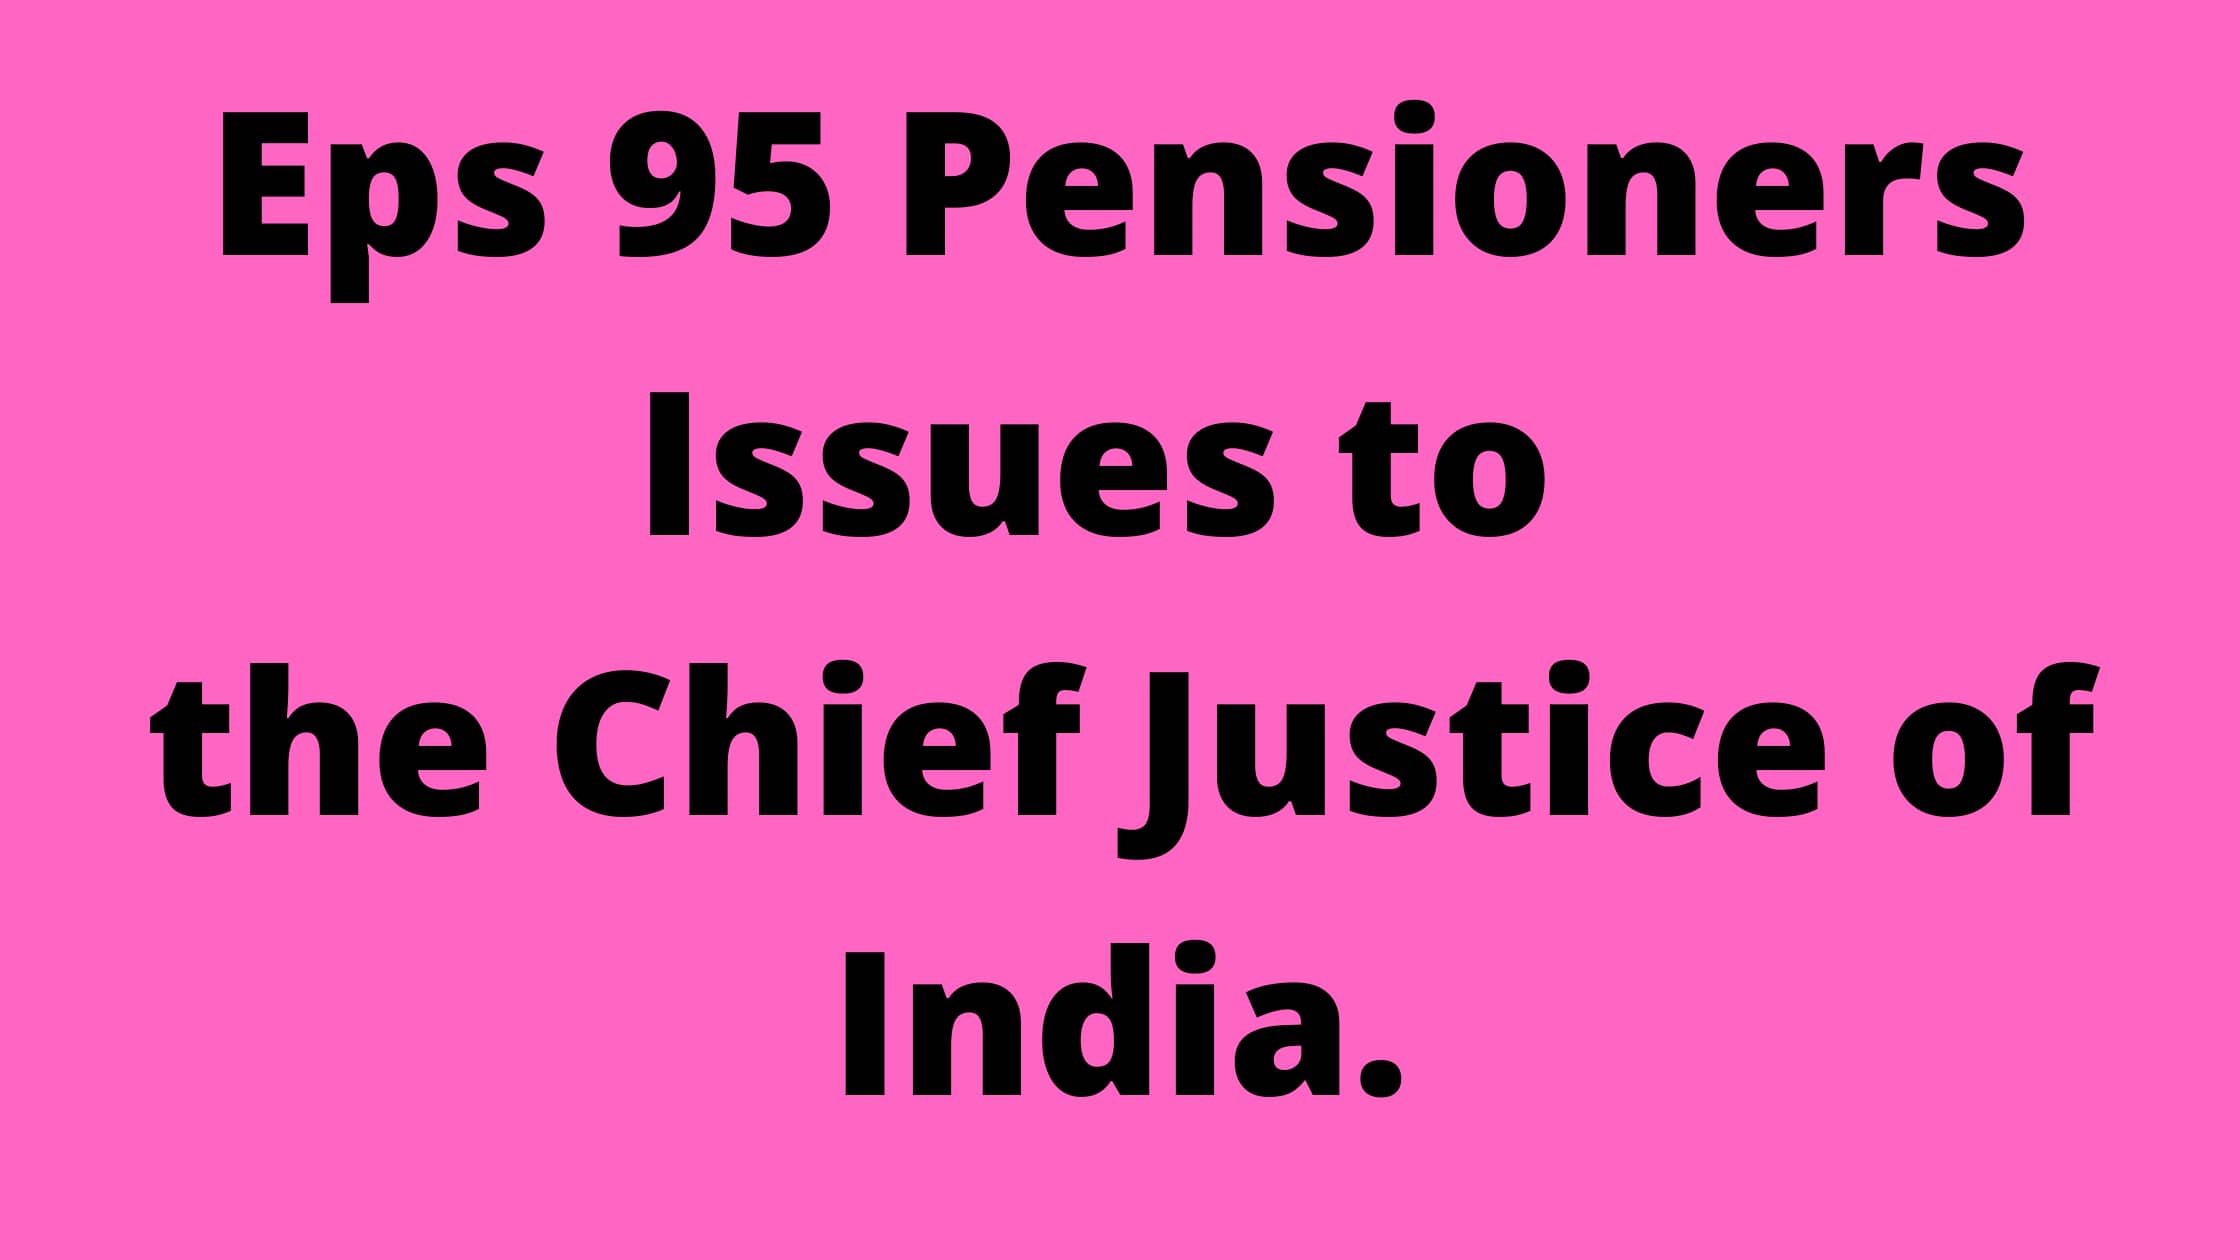 Eps 95 Pensioners Issues to the Chief Justice of India.